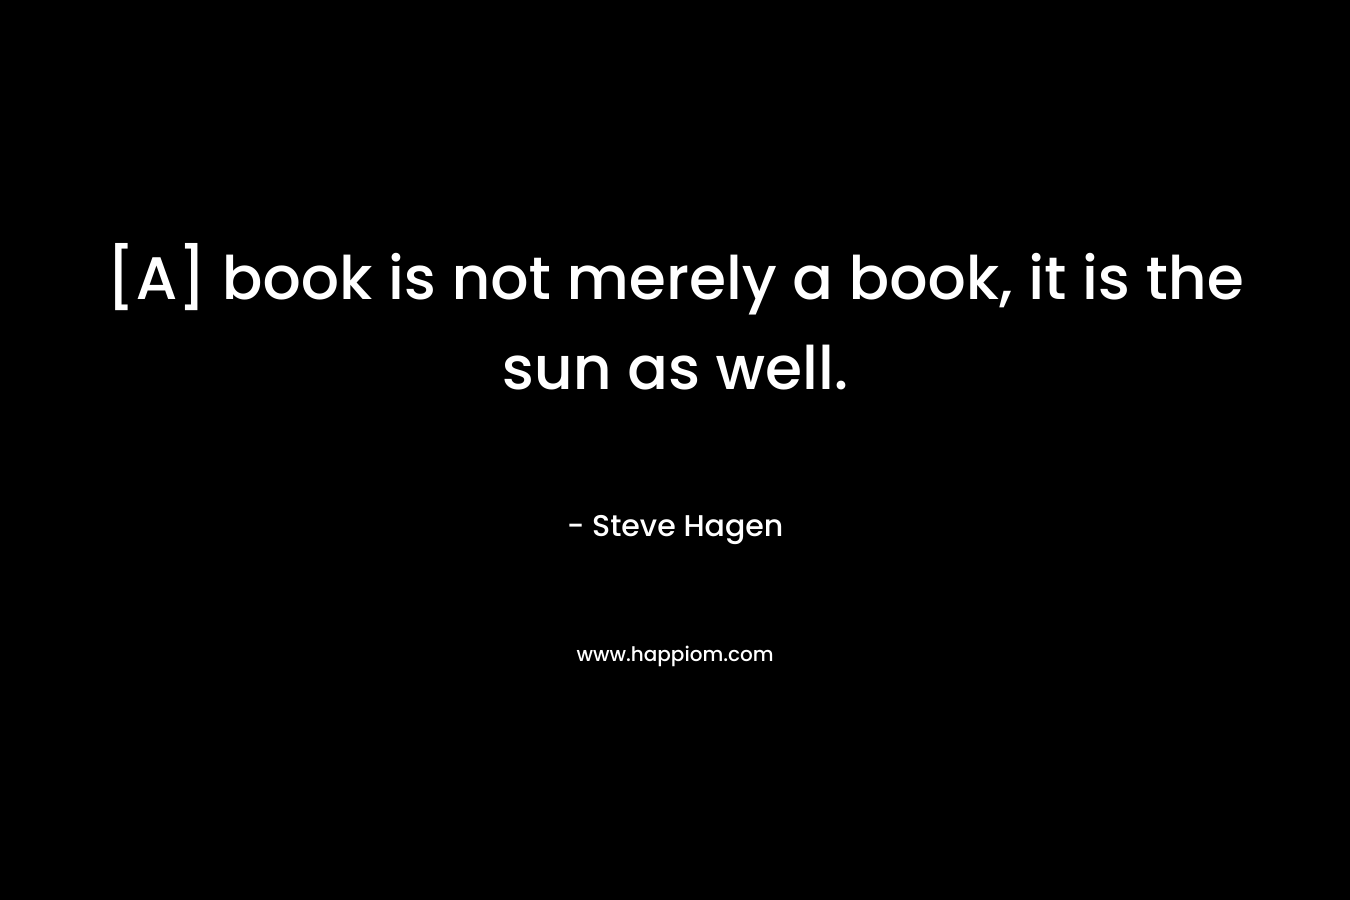 [A] book is not merely a book, it is the sun as well.